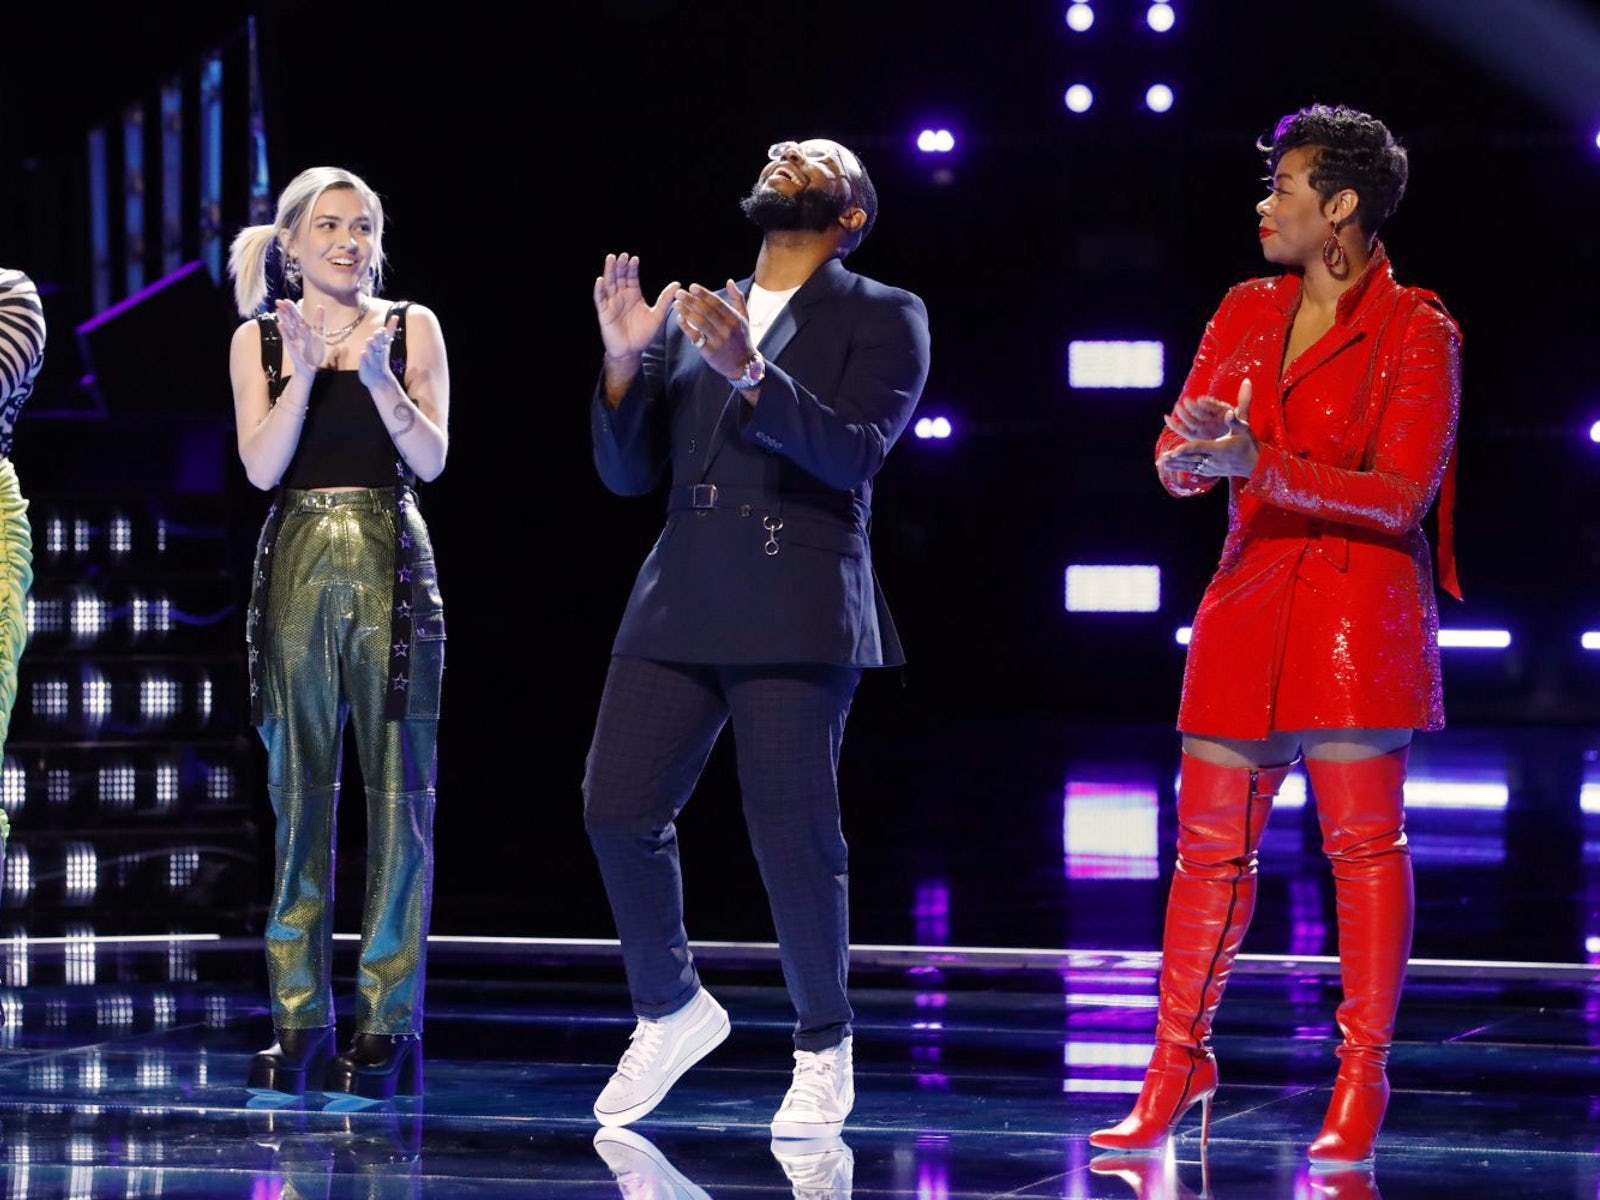 'The Voice' determines Top 9 artists and eliminates eight hopefuls